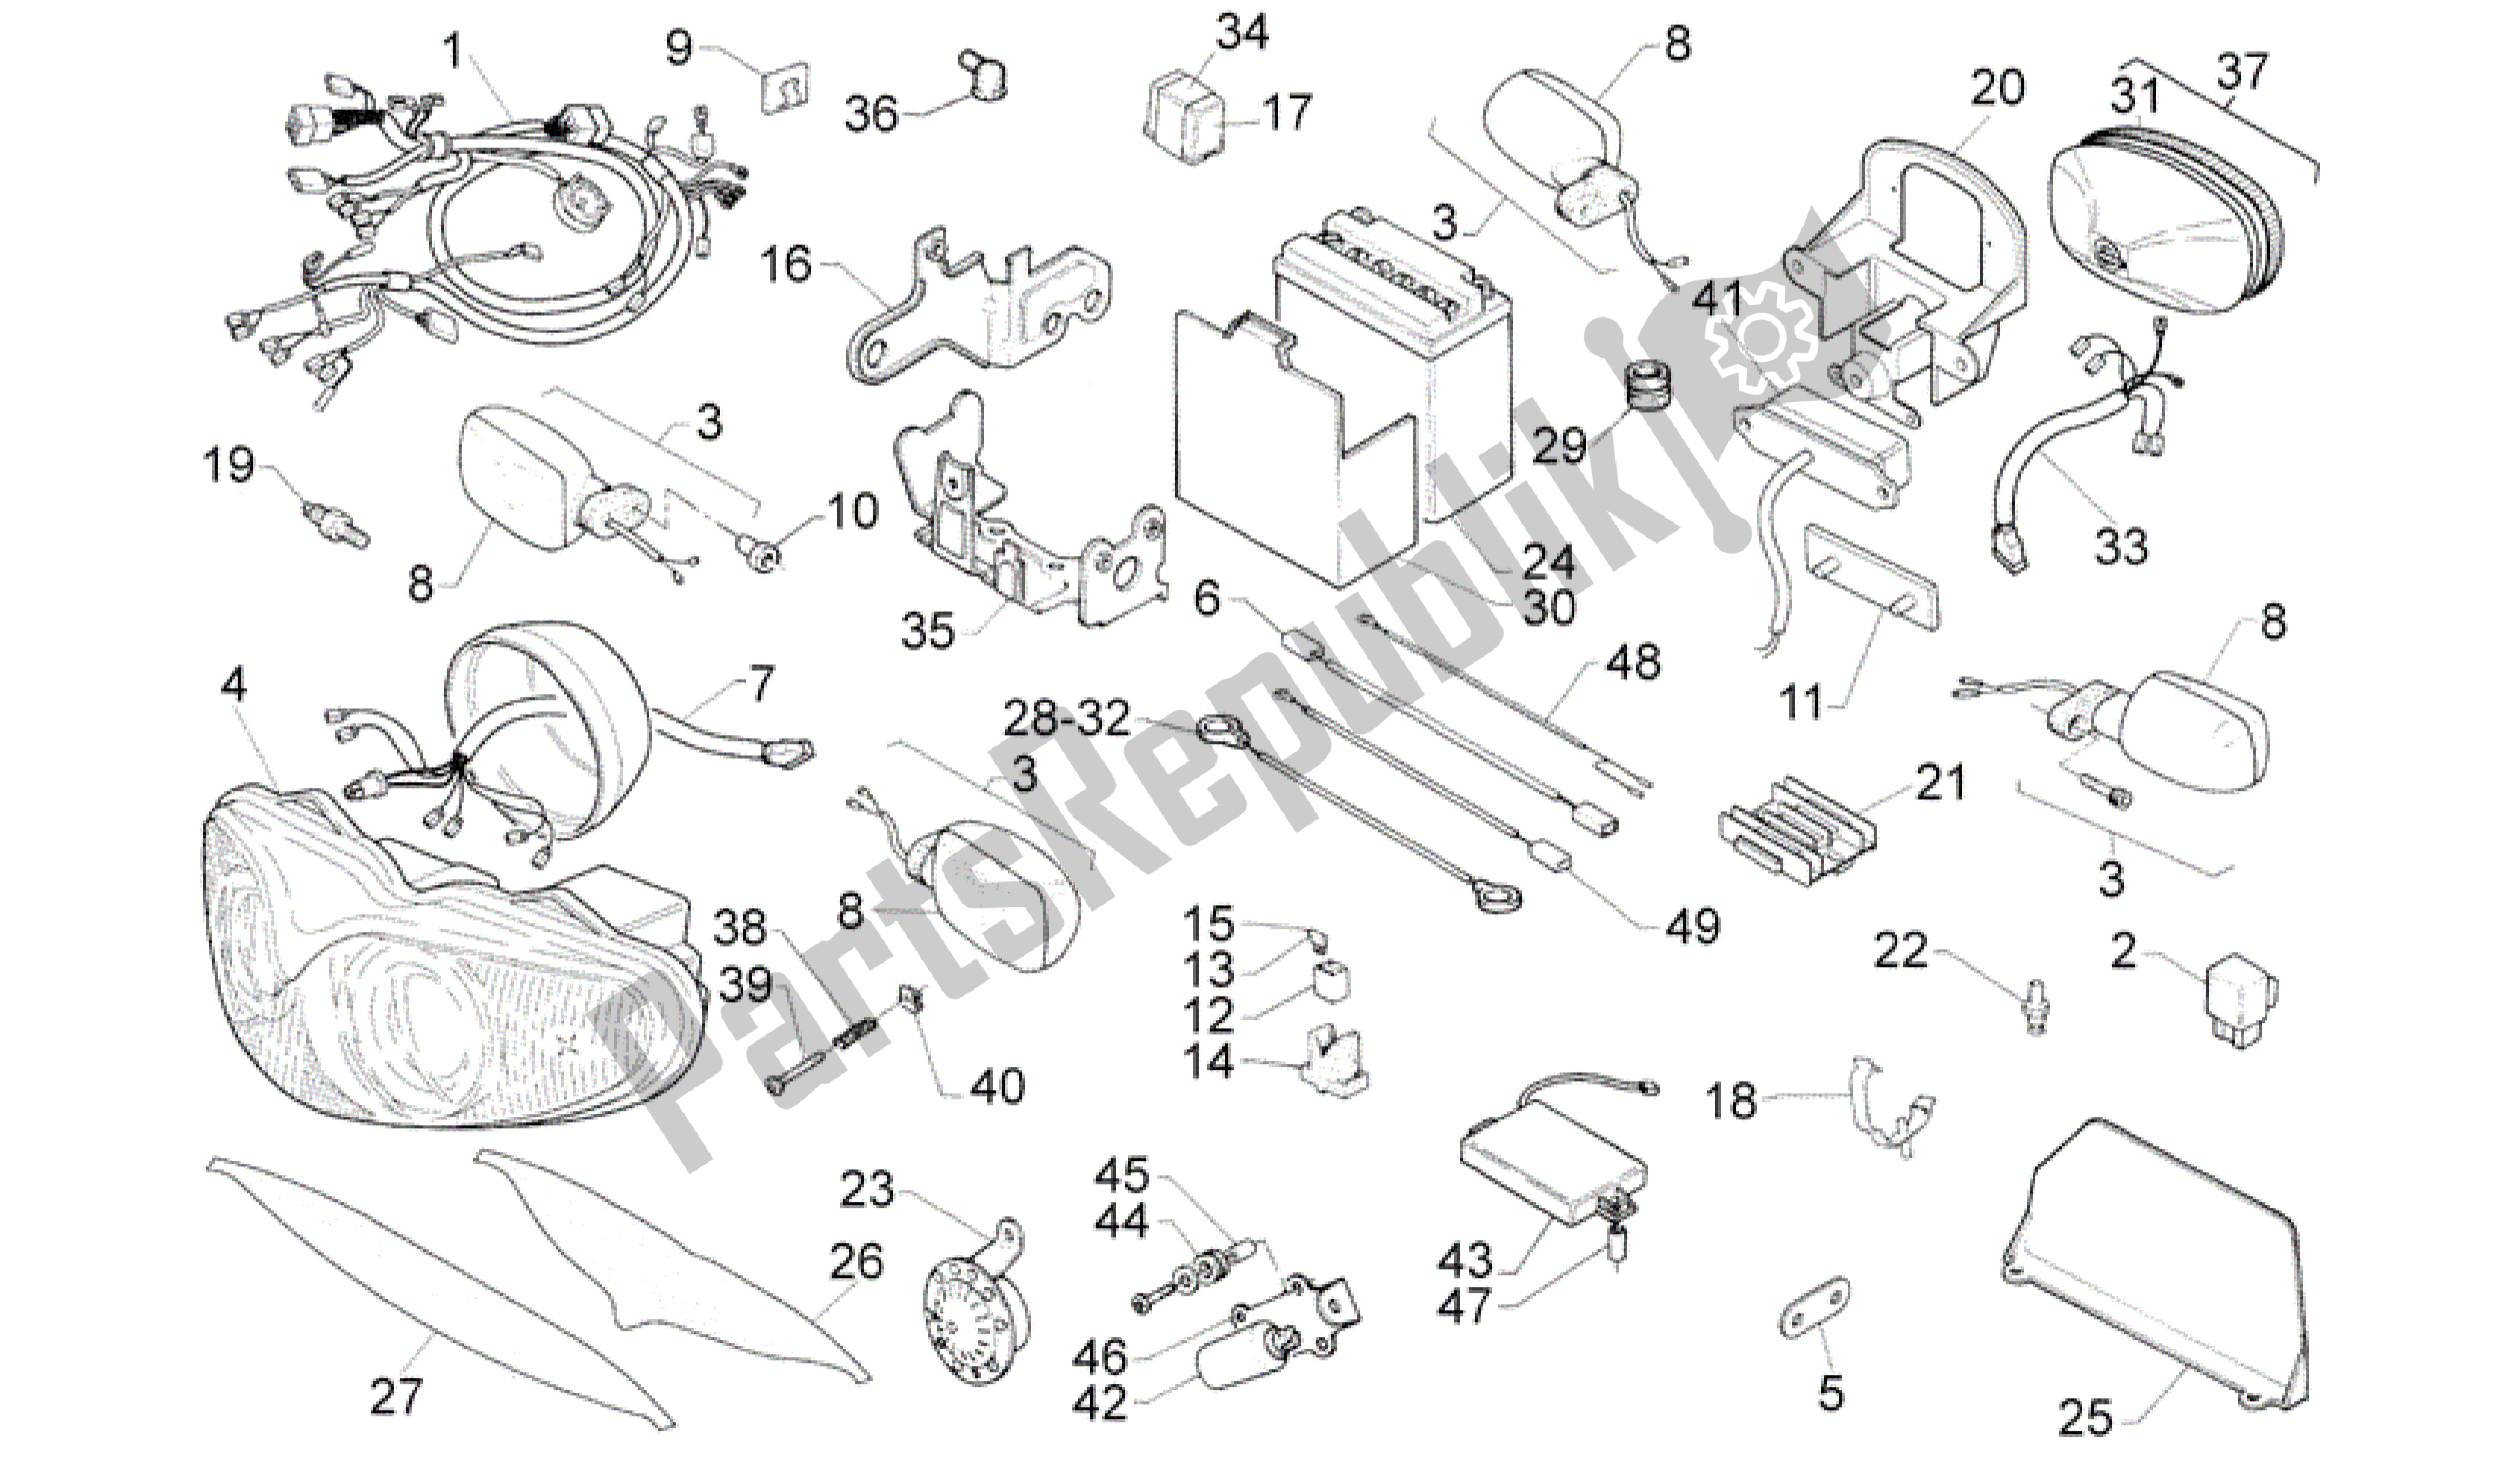 All parts for the Electrical System of the Aprilia Rotax 122 125 1996 - 1997